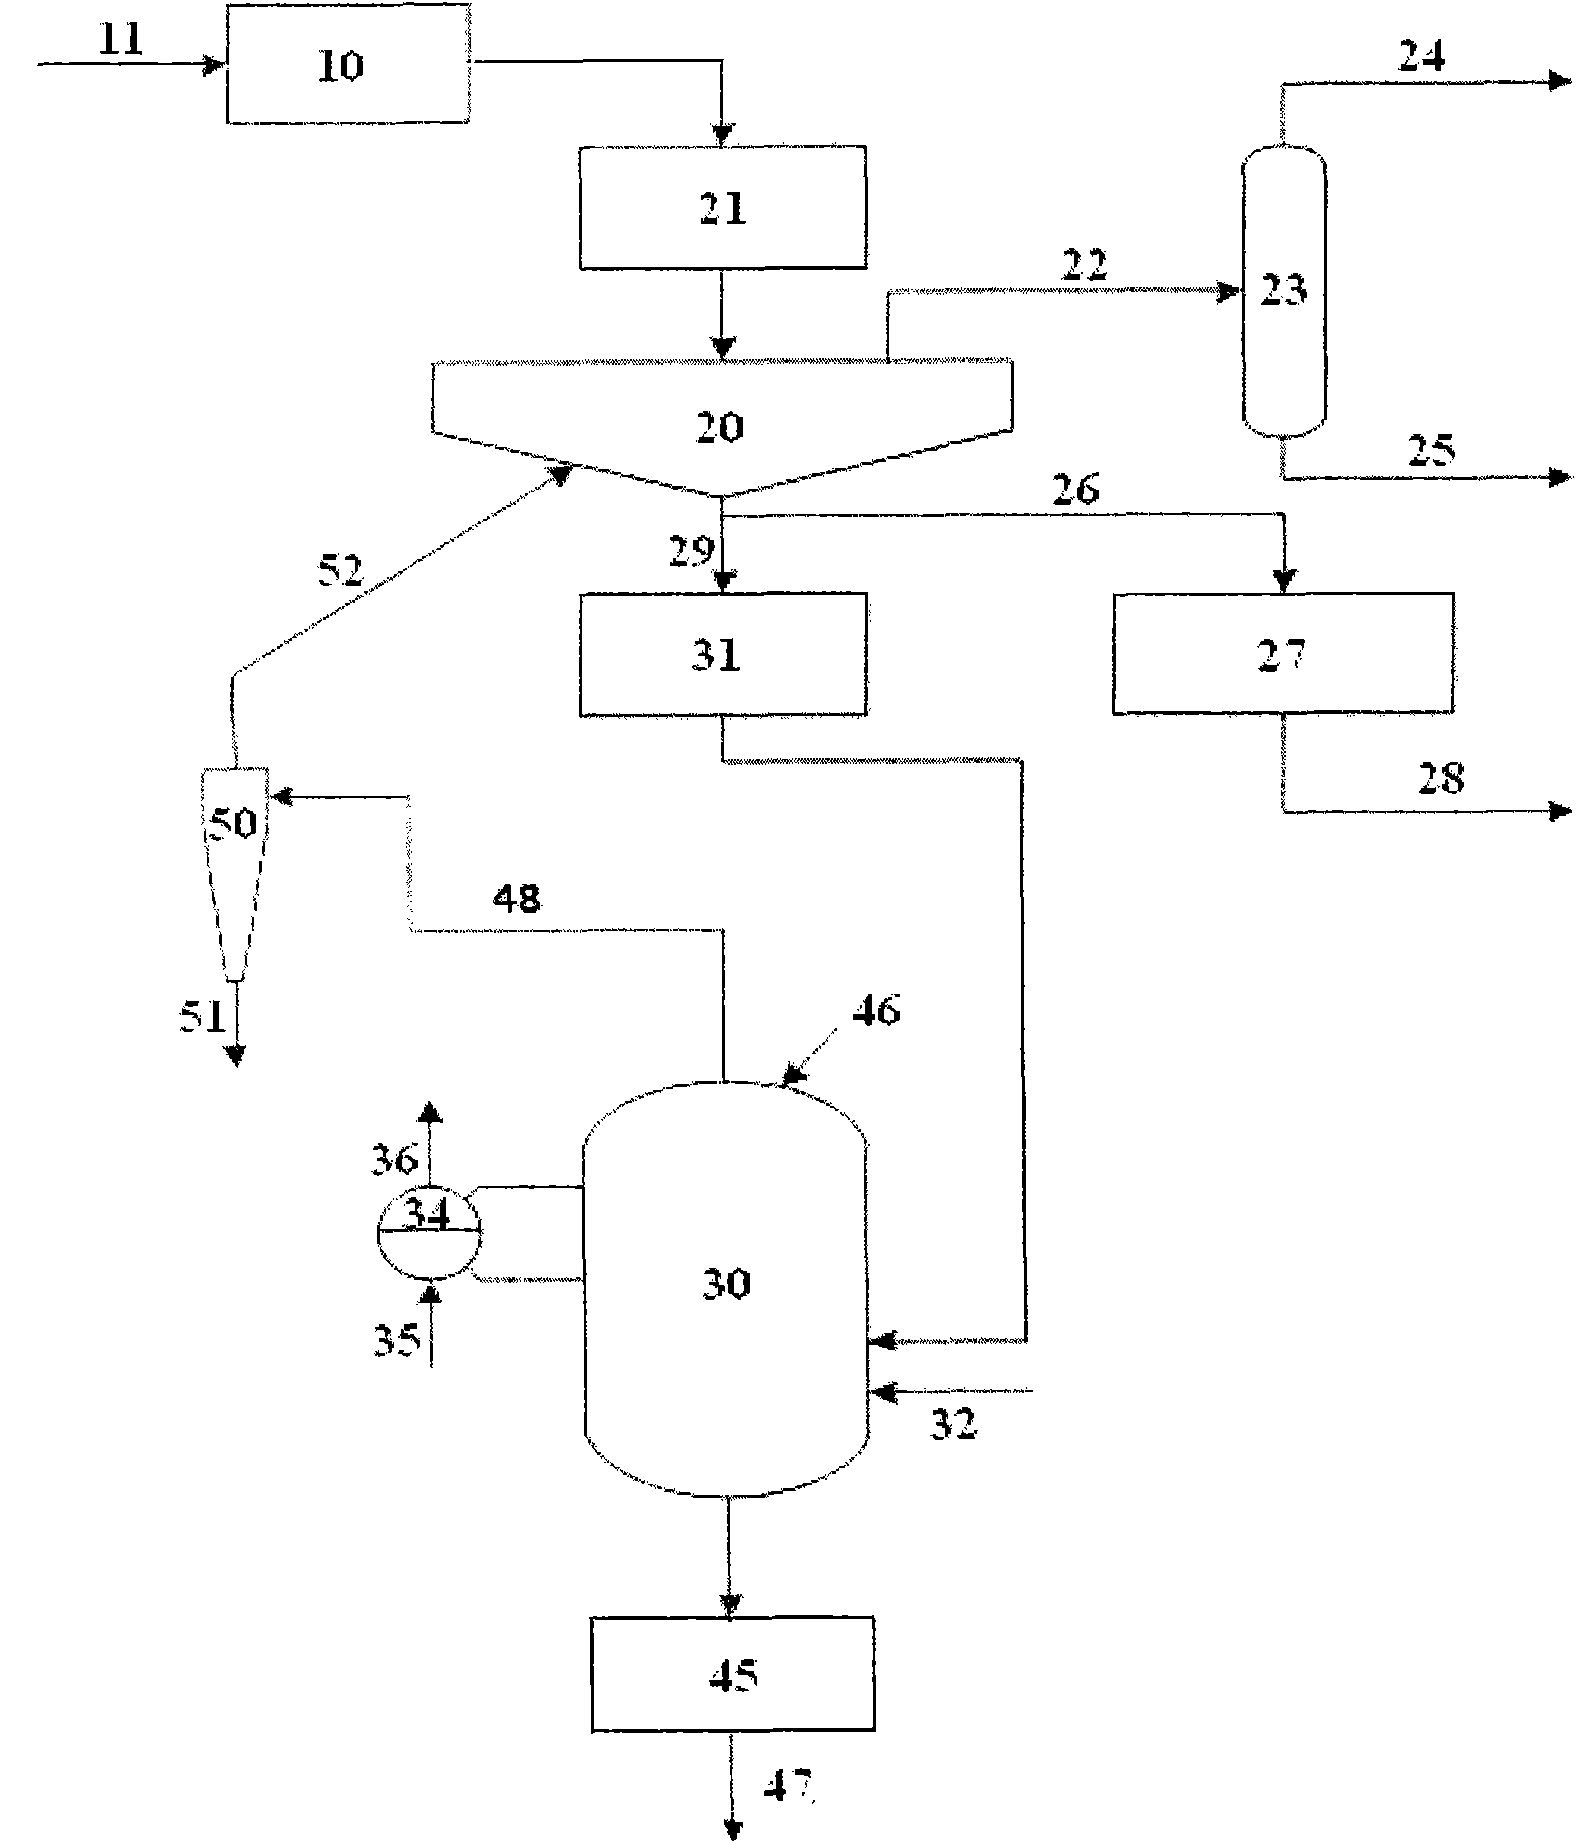 System for preparing solid, liquid and gas products from coal and biomass and method using same